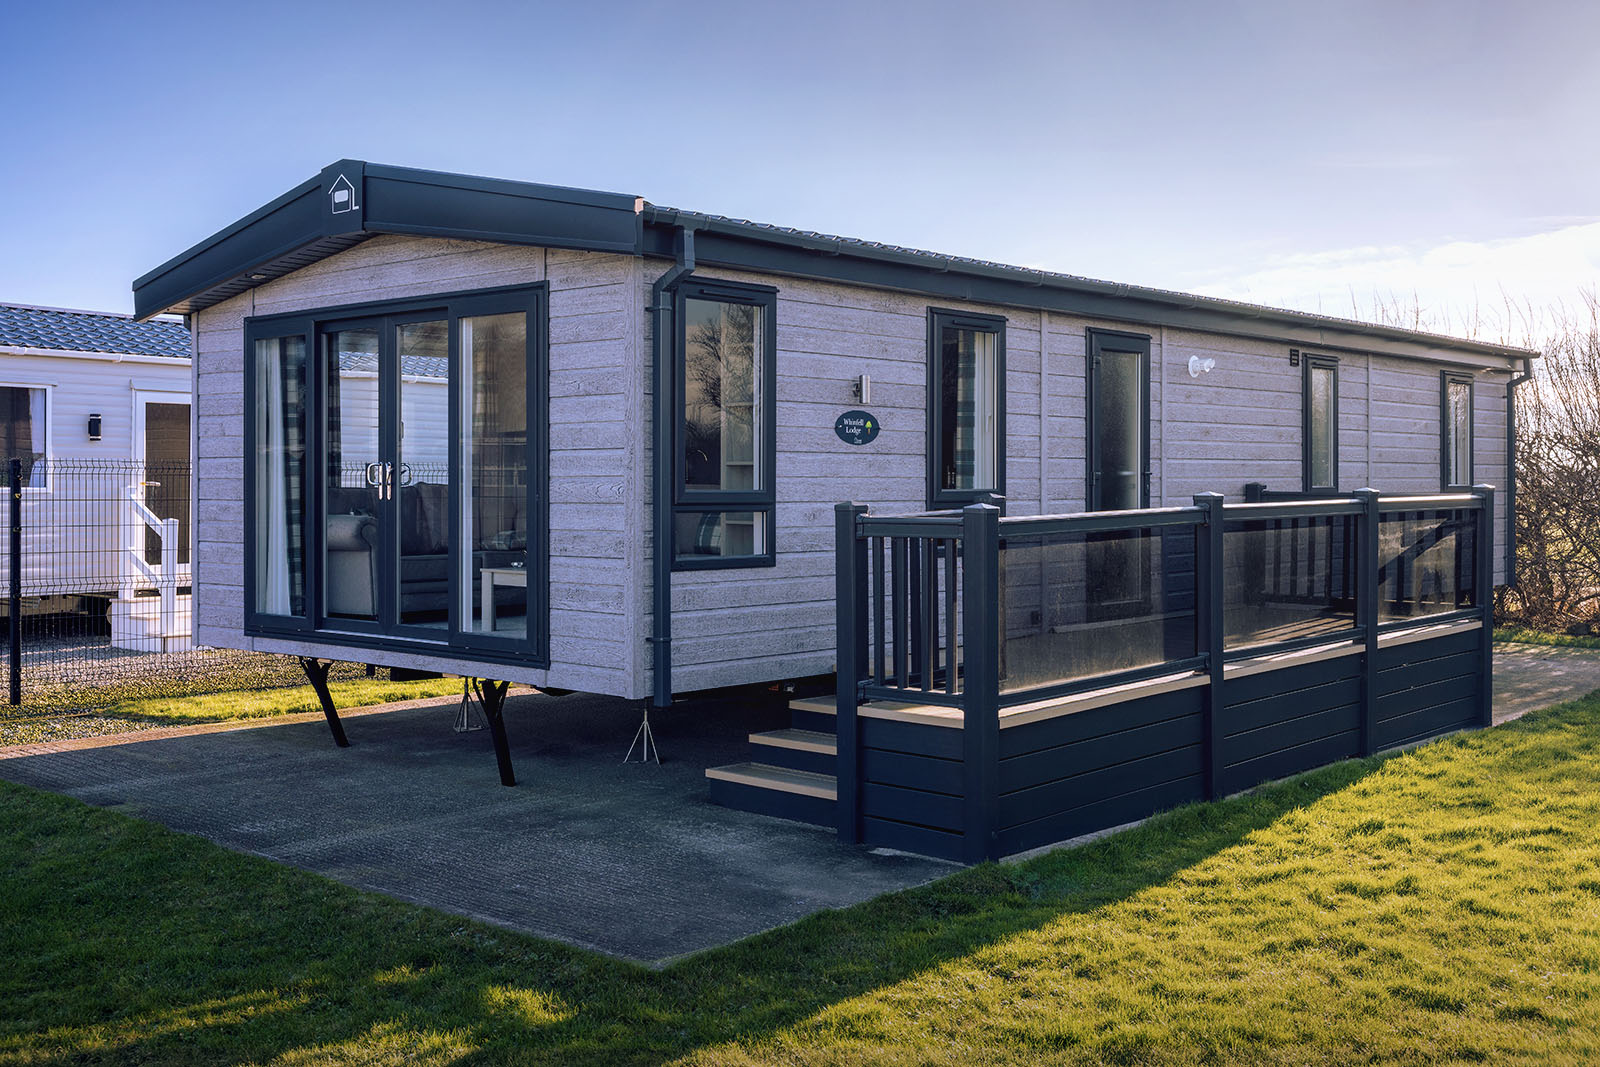 Whinfell Lodge caravan situated in a holiday park.